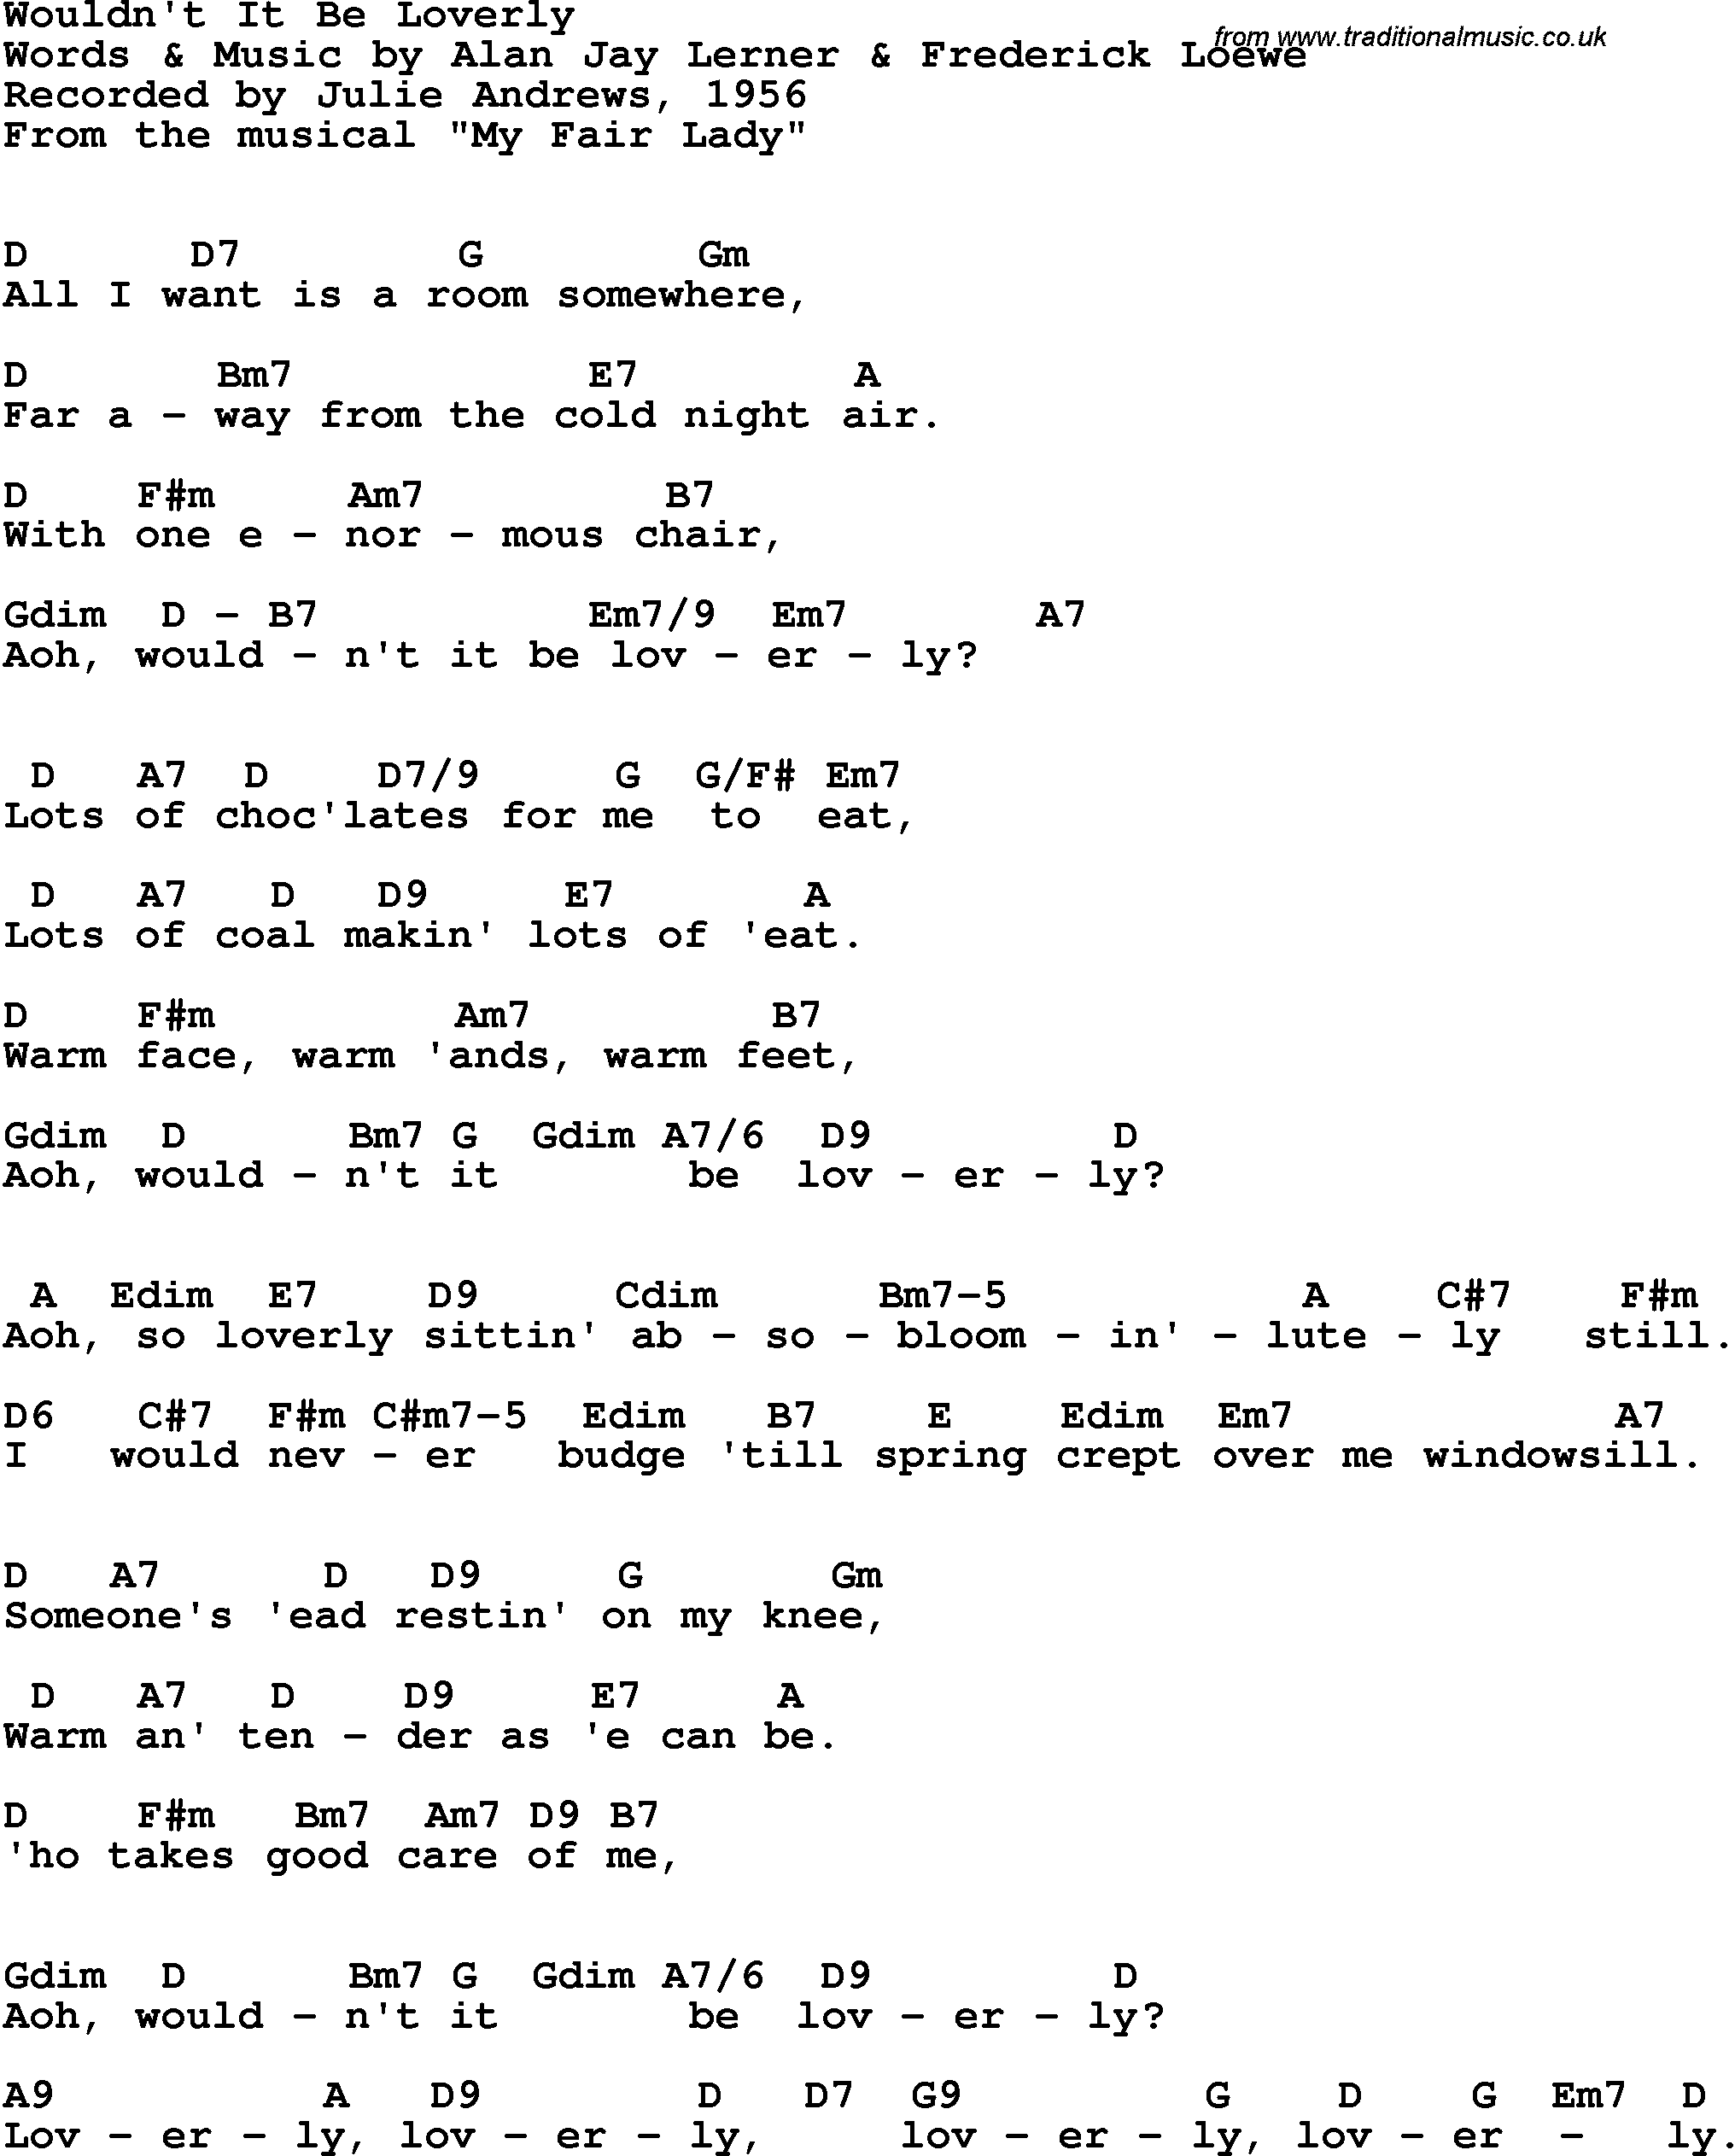 Song Lyrics with guitar chords for Wouldn't It Be Loverly - Julie Andrews, 1956